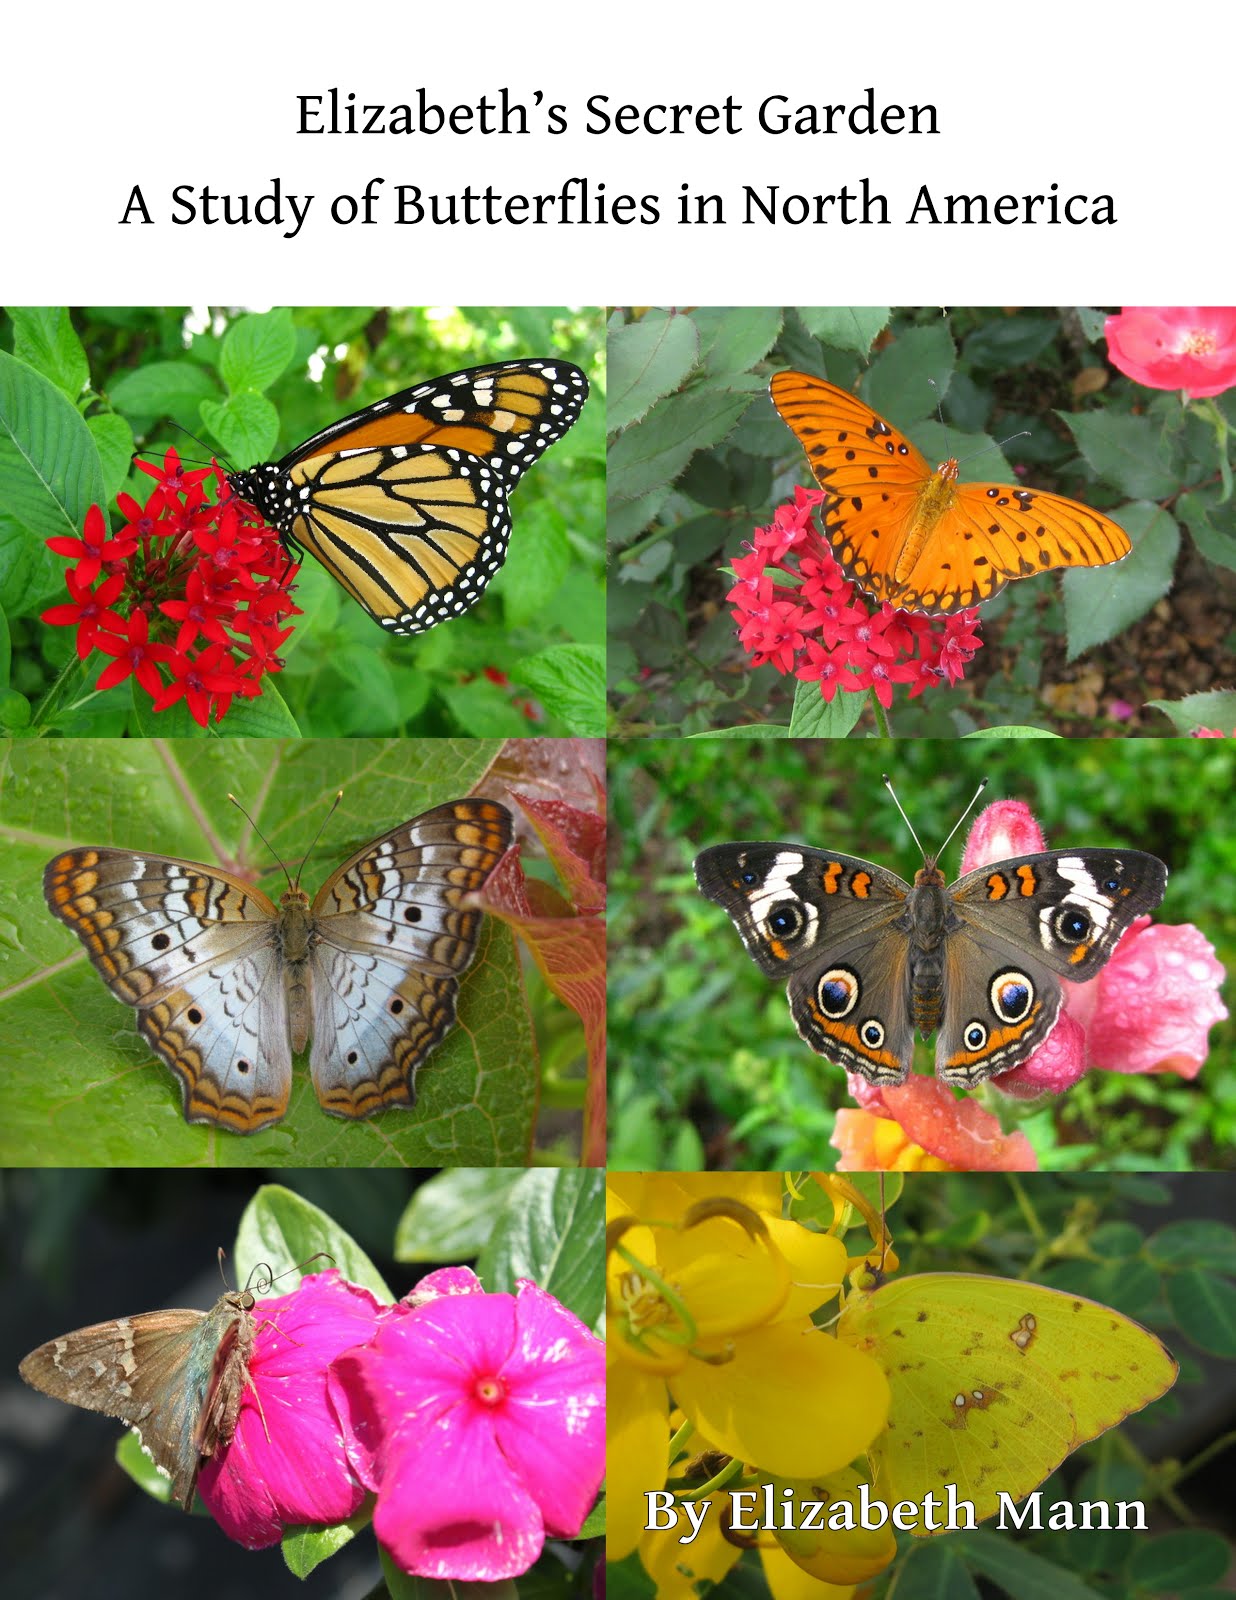 Click to Buy My Book on Butterflies